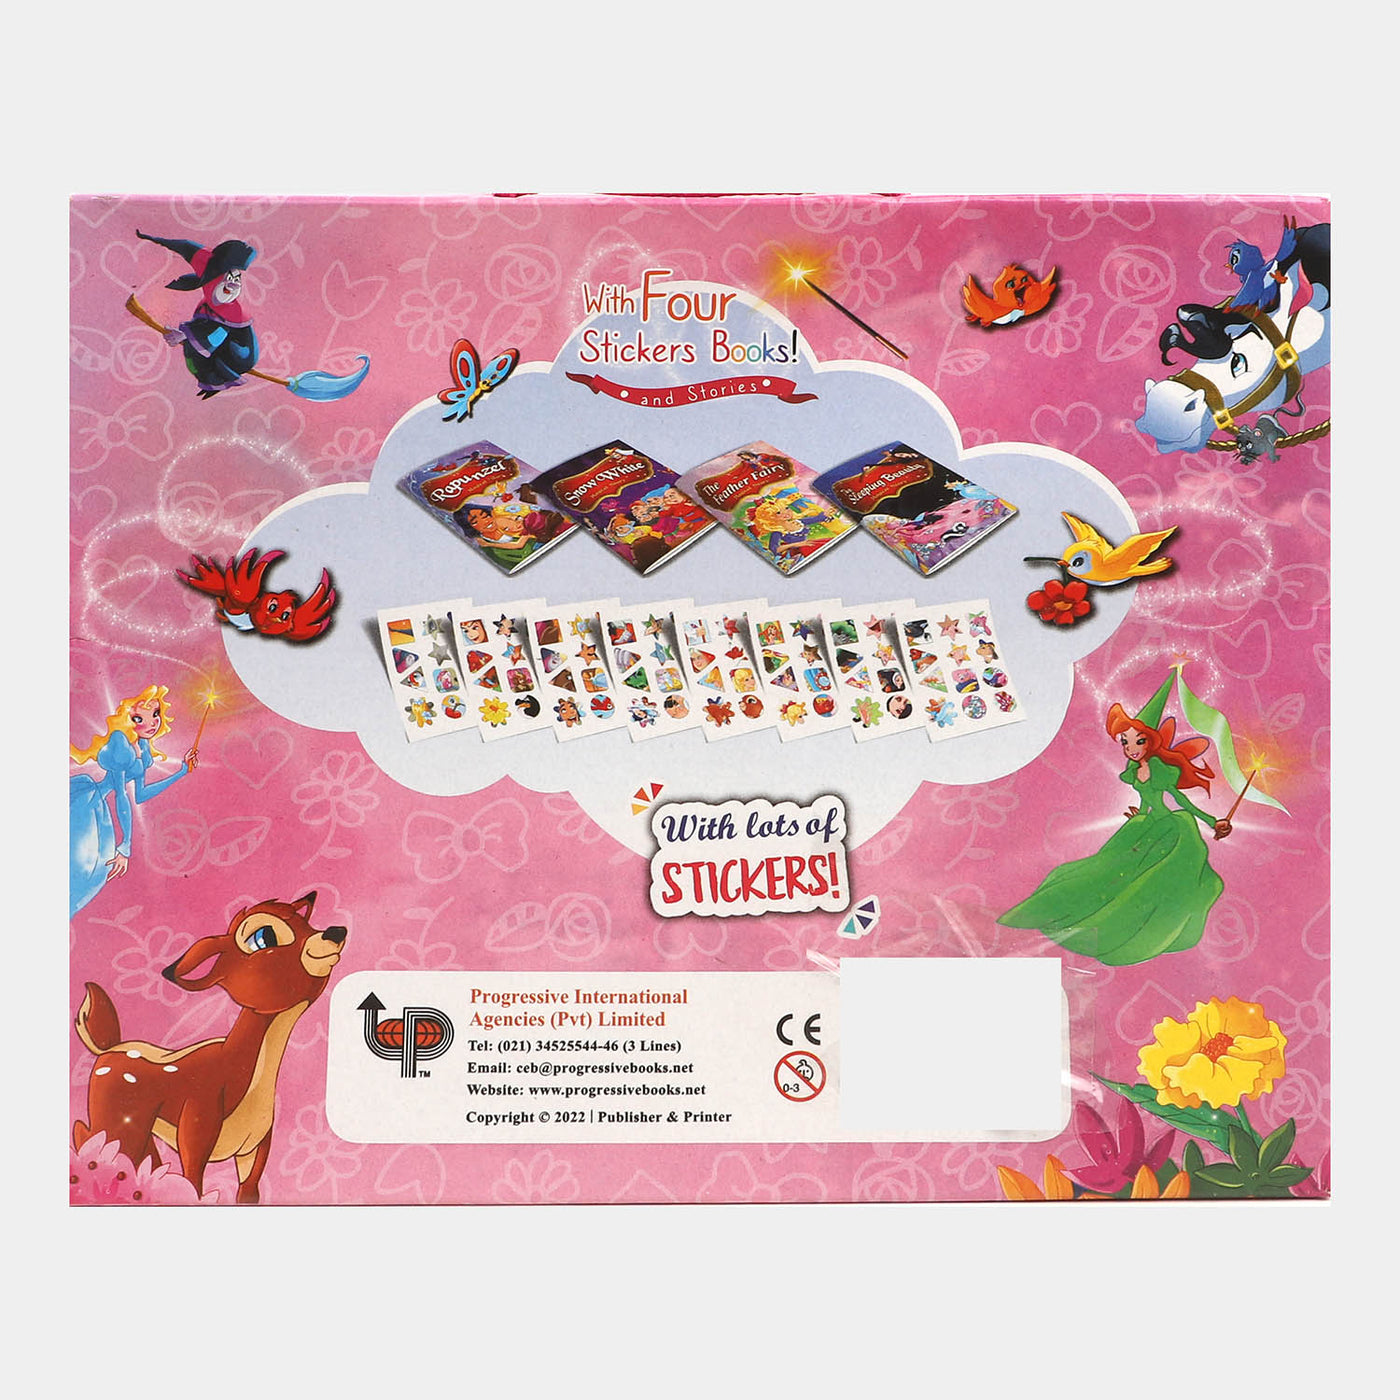 Princess Activity Books & stickers Pack For Girls